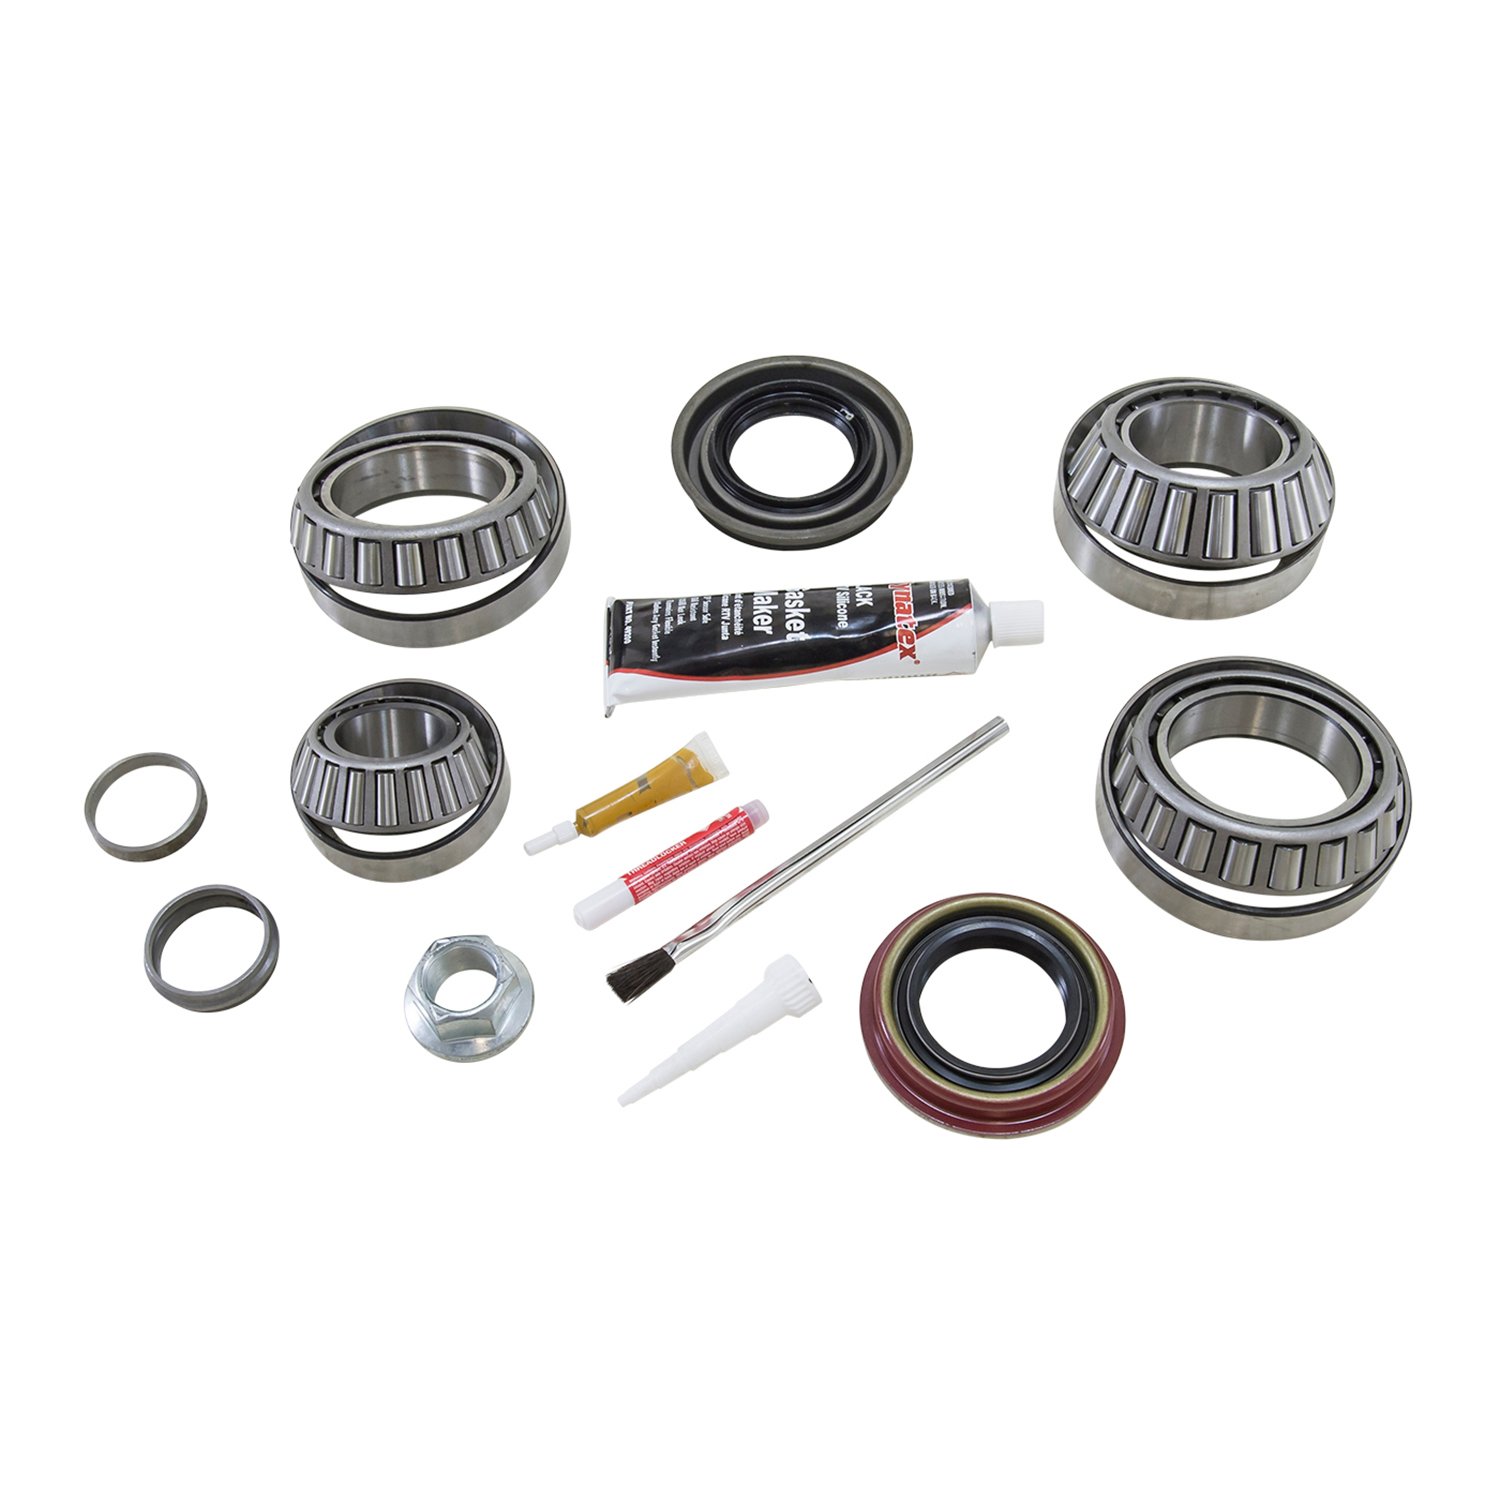 Bearing Install Kit For '08-'10 Ford 9.75 in. Differential.